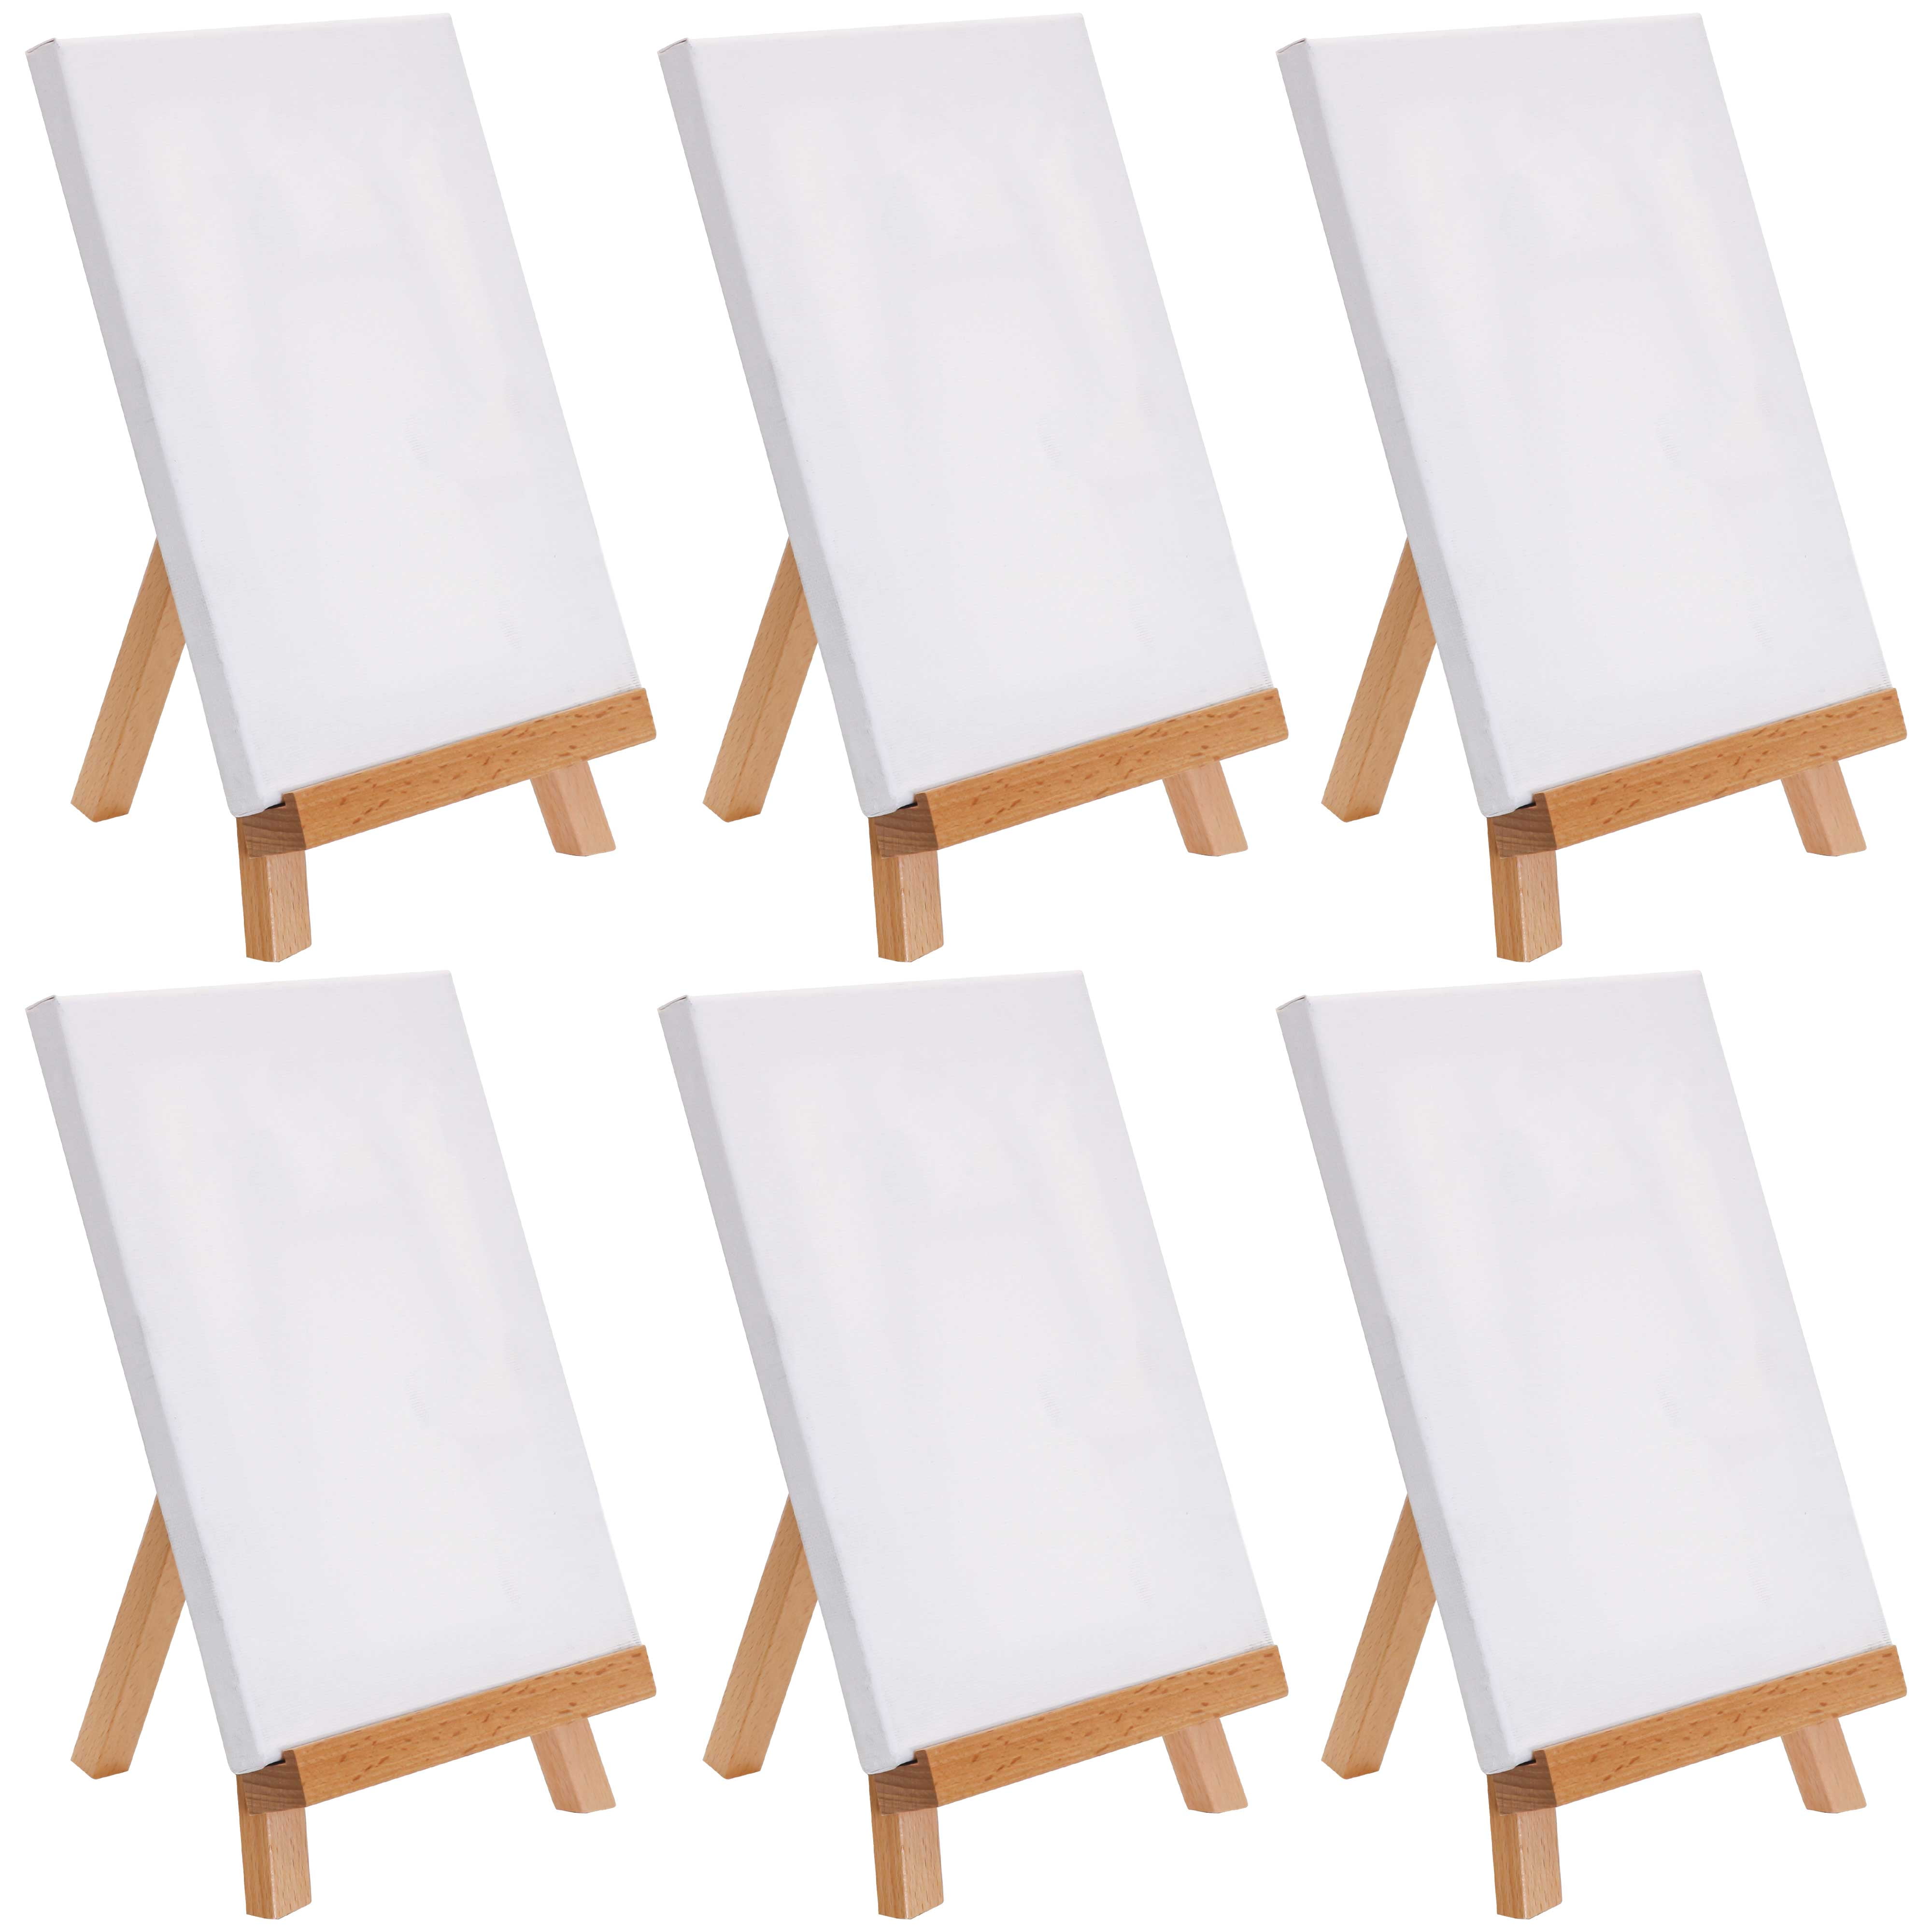  Tosnail 24 Pack 4 x 4 Mini Canvas and Easel Set